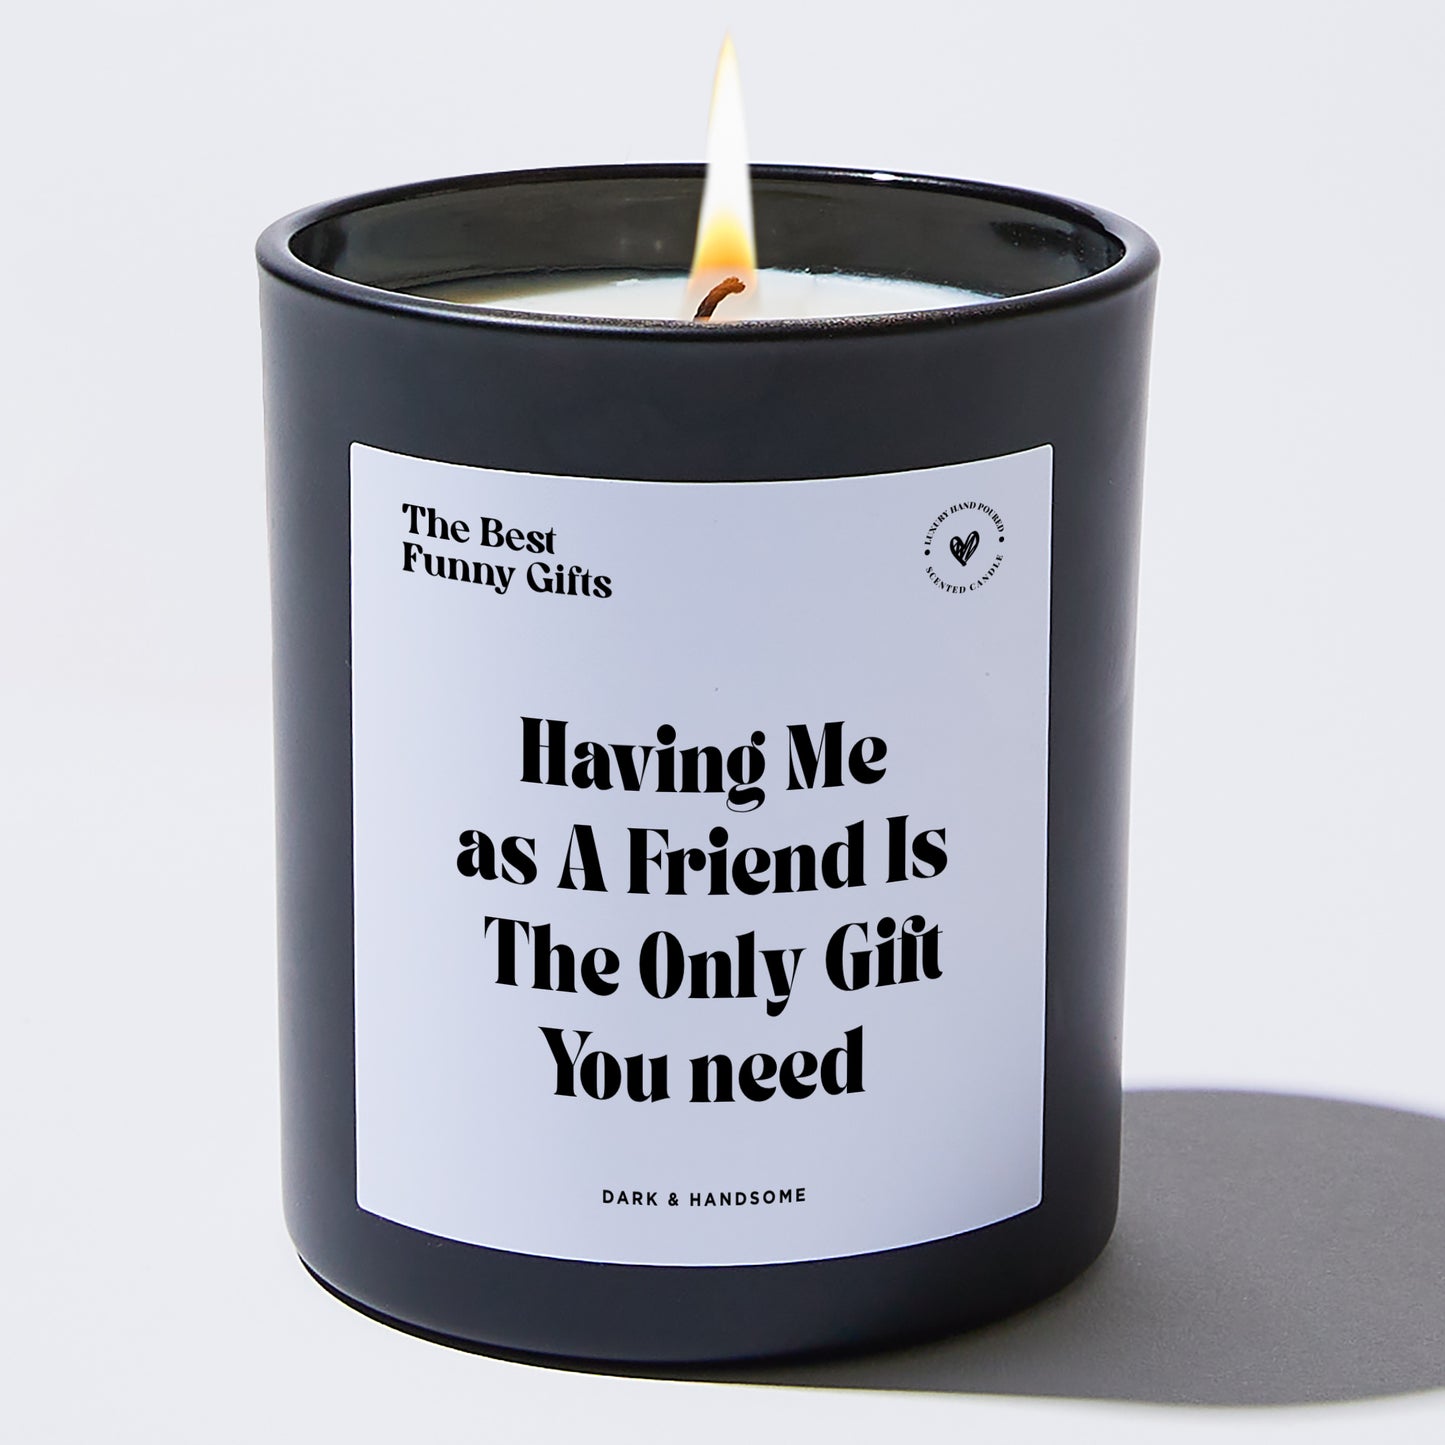 Scented candle, funny candle, friendship gift, fun gift for men